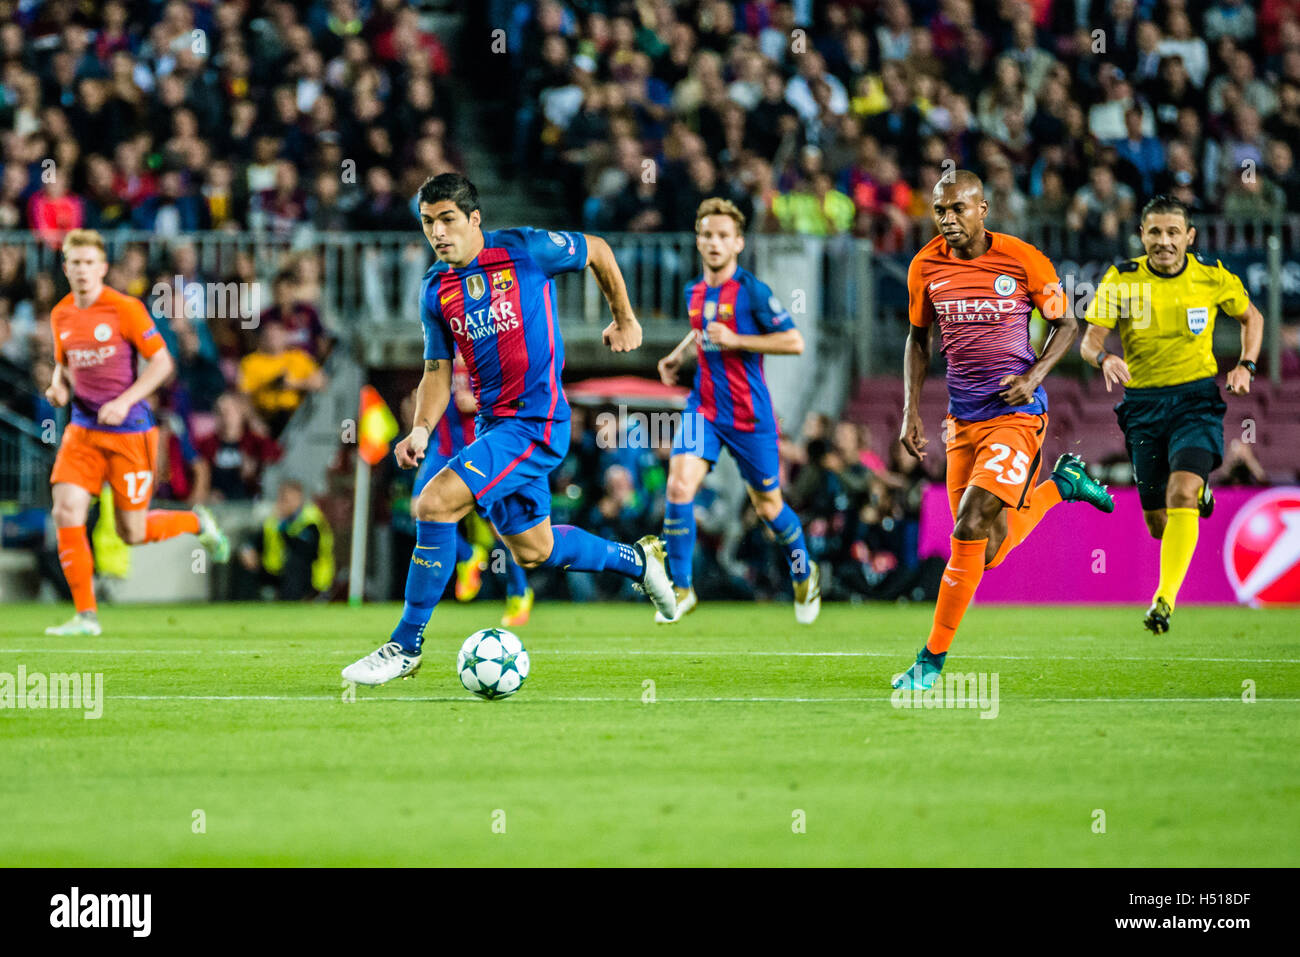 Barcelona, Catalonia, Spain. 19th Oct, 2016. FC Barcelona forward SUAREZ in action during the Champions League match between FC Barcelona and Manchester City at the Camp Nou stadium in Barcelona Credit:  Matthias Oesterle/ZUMA Wire/Alamy Live News Stock Photo